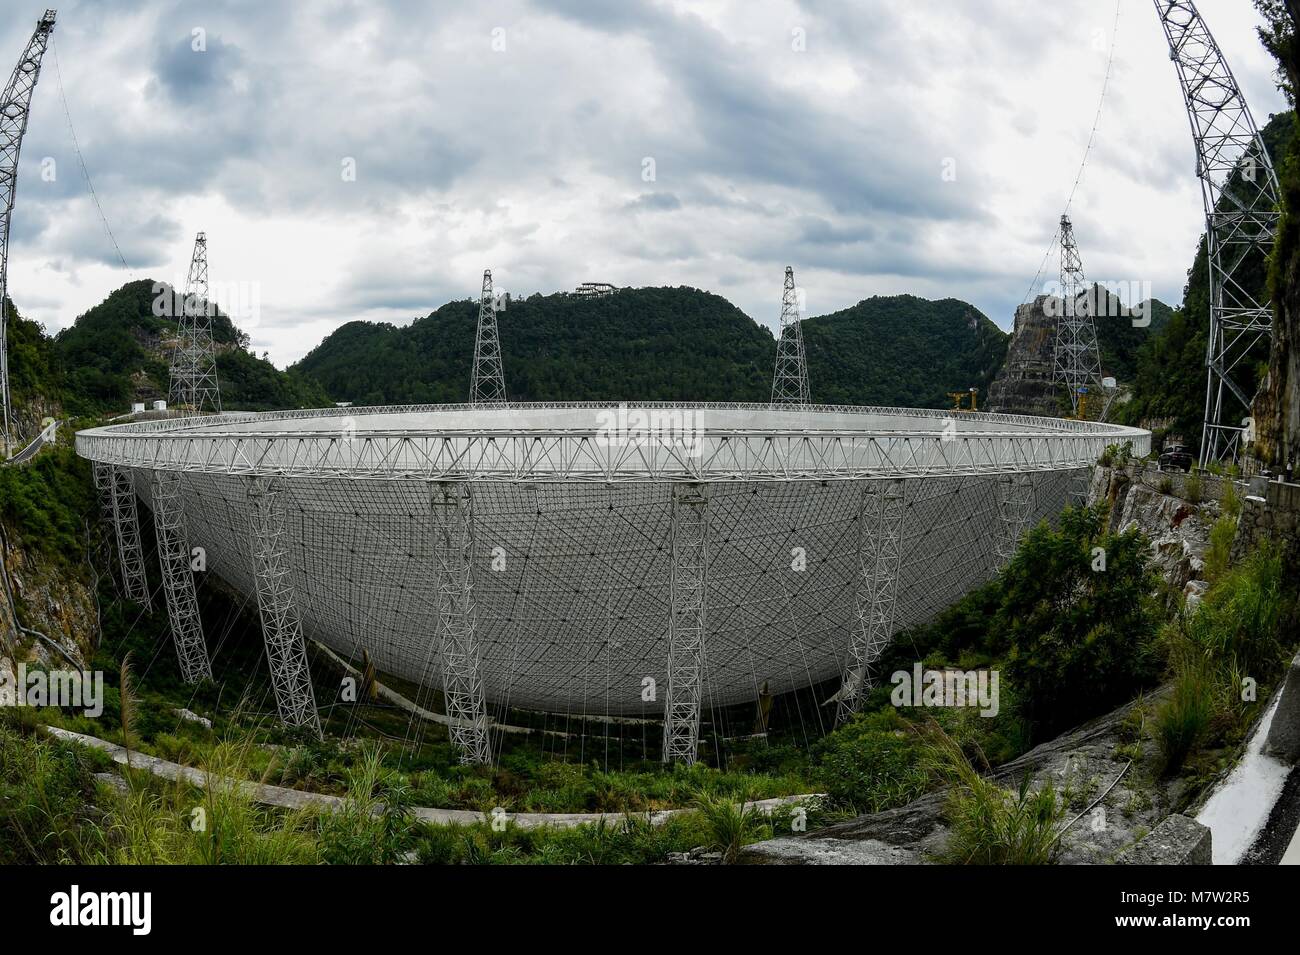 (180313) -- GUIYANG, March 13, 2018 (Xinhua) -- File photo taken on Aug. 9, 2017, shows the Five-hundred-meter Aperture Spherical Radio Telescope (FAST) in Pingtang County, southwest China's Guizhou Province. China's FAST, the world's largest single-dish radio telescope, has discovered 11 new pulsars so far, the National Astronomical Observatories of China (NAOC) said Tuesday. (Xinhua/Ou Dongqu)(wsw) Stock Photo